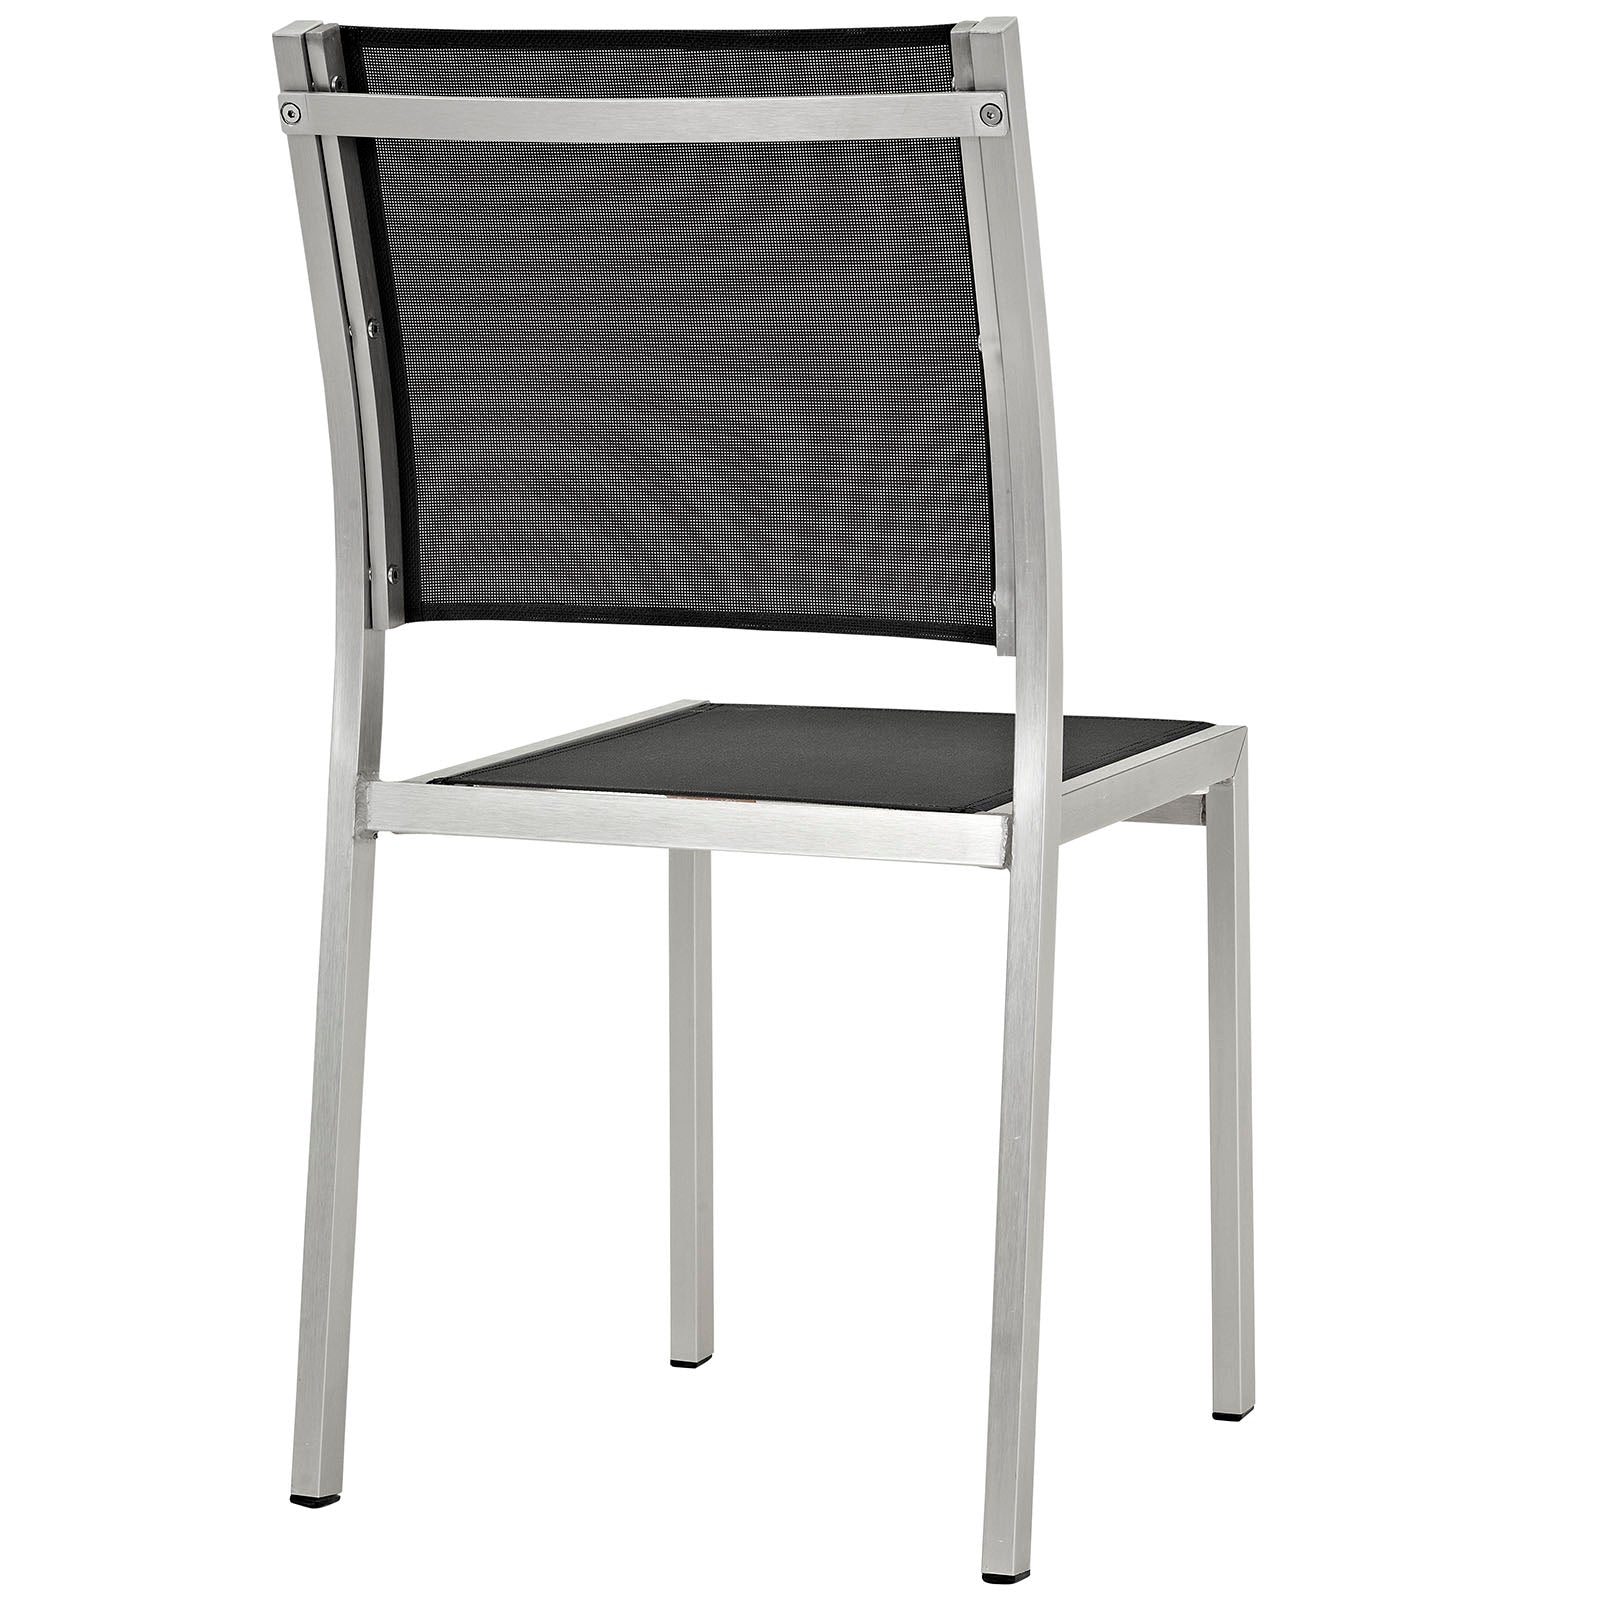 Modway Outdoor Dining Chairs - Shore Side Chair Outdoor Patio Aluminum Set of 2 Silver Black